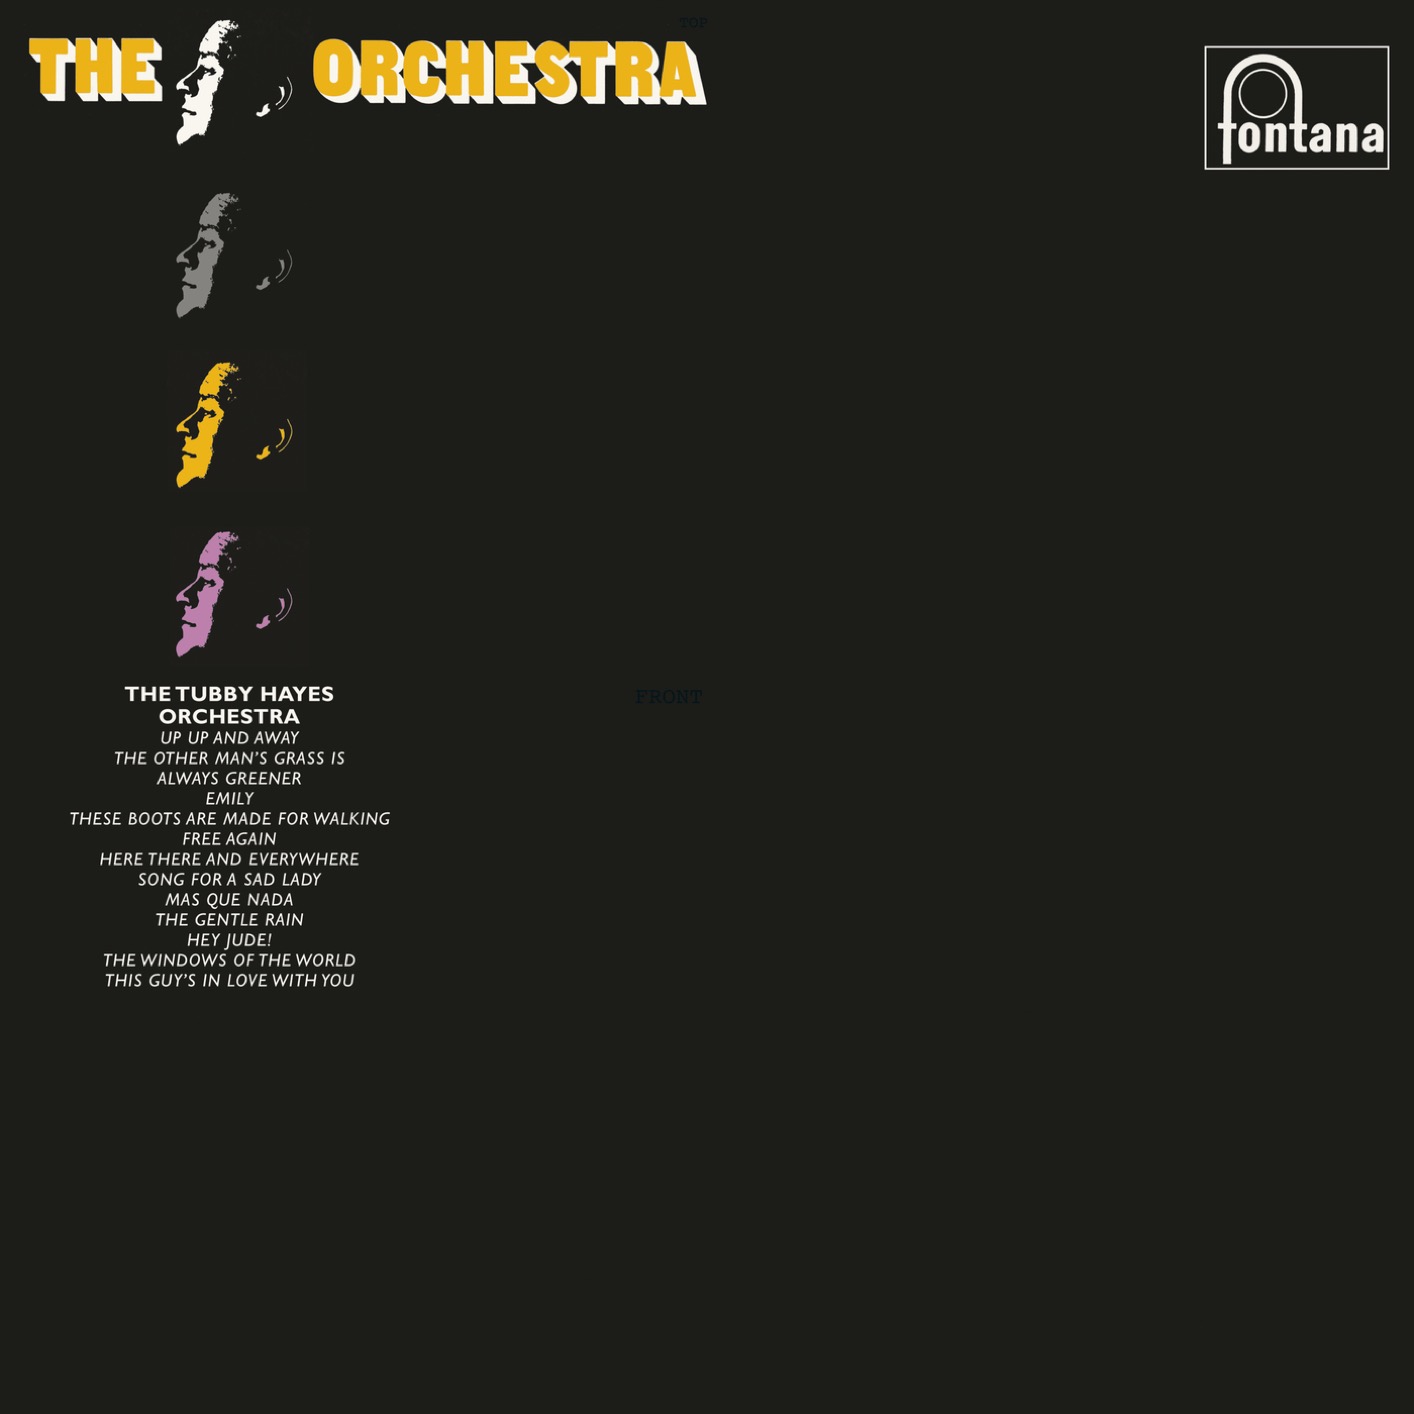 The Tubby Hayes Orchestra - The Orchestra (Remastered) (1970/2019) [FLAC 24bit/88,2kHz]